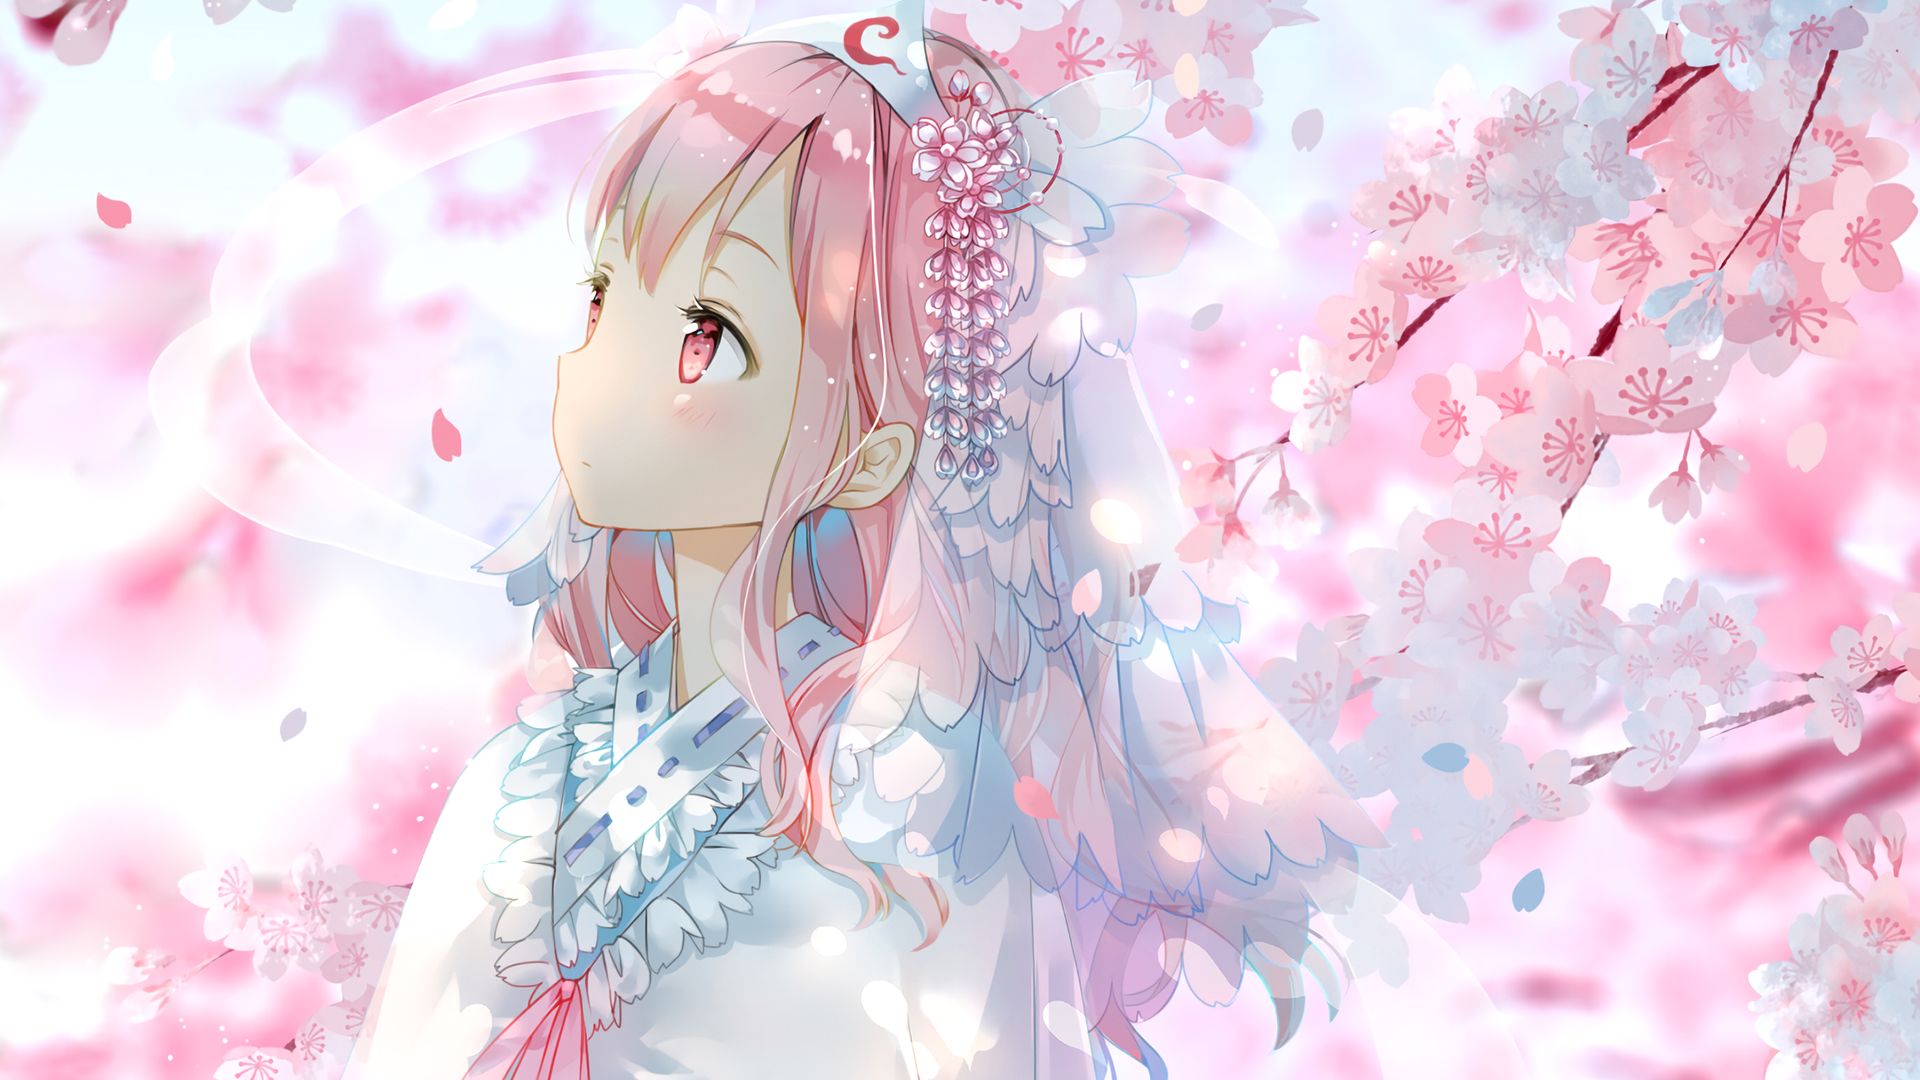 Download Anime Spring Aesthetic Wallpaper | Wallpapers.com